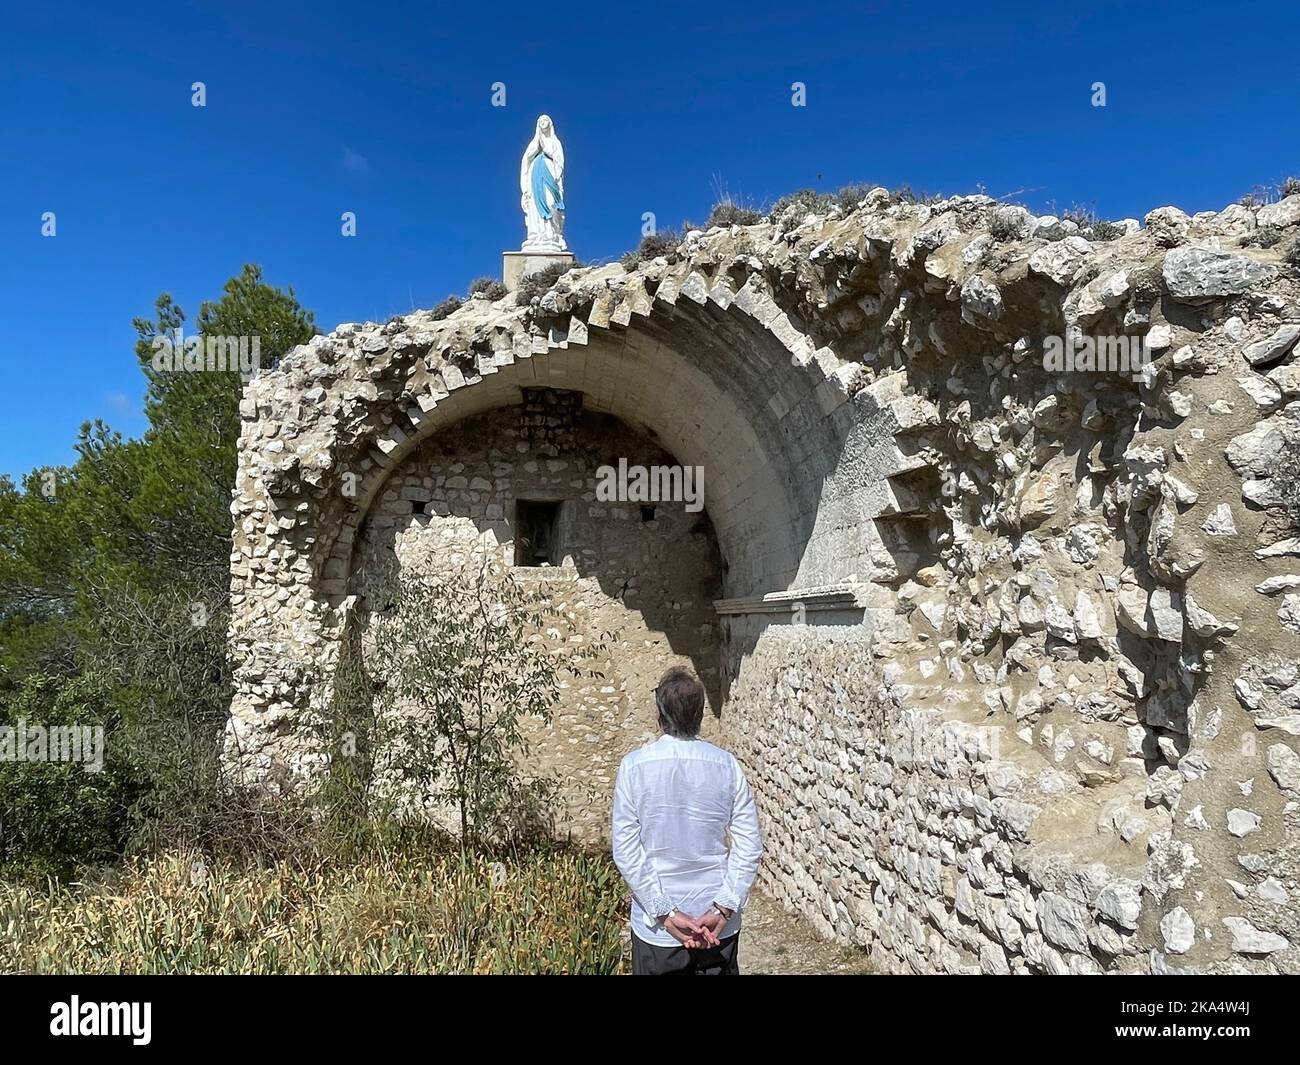 Rear view of a man with his hands clasped behind his back looking up at La statue de la vierge juchee, Eygalieres, Bouches-du-Rhone, Provence-Alpes-Cote d'Azur, France Stock Photo